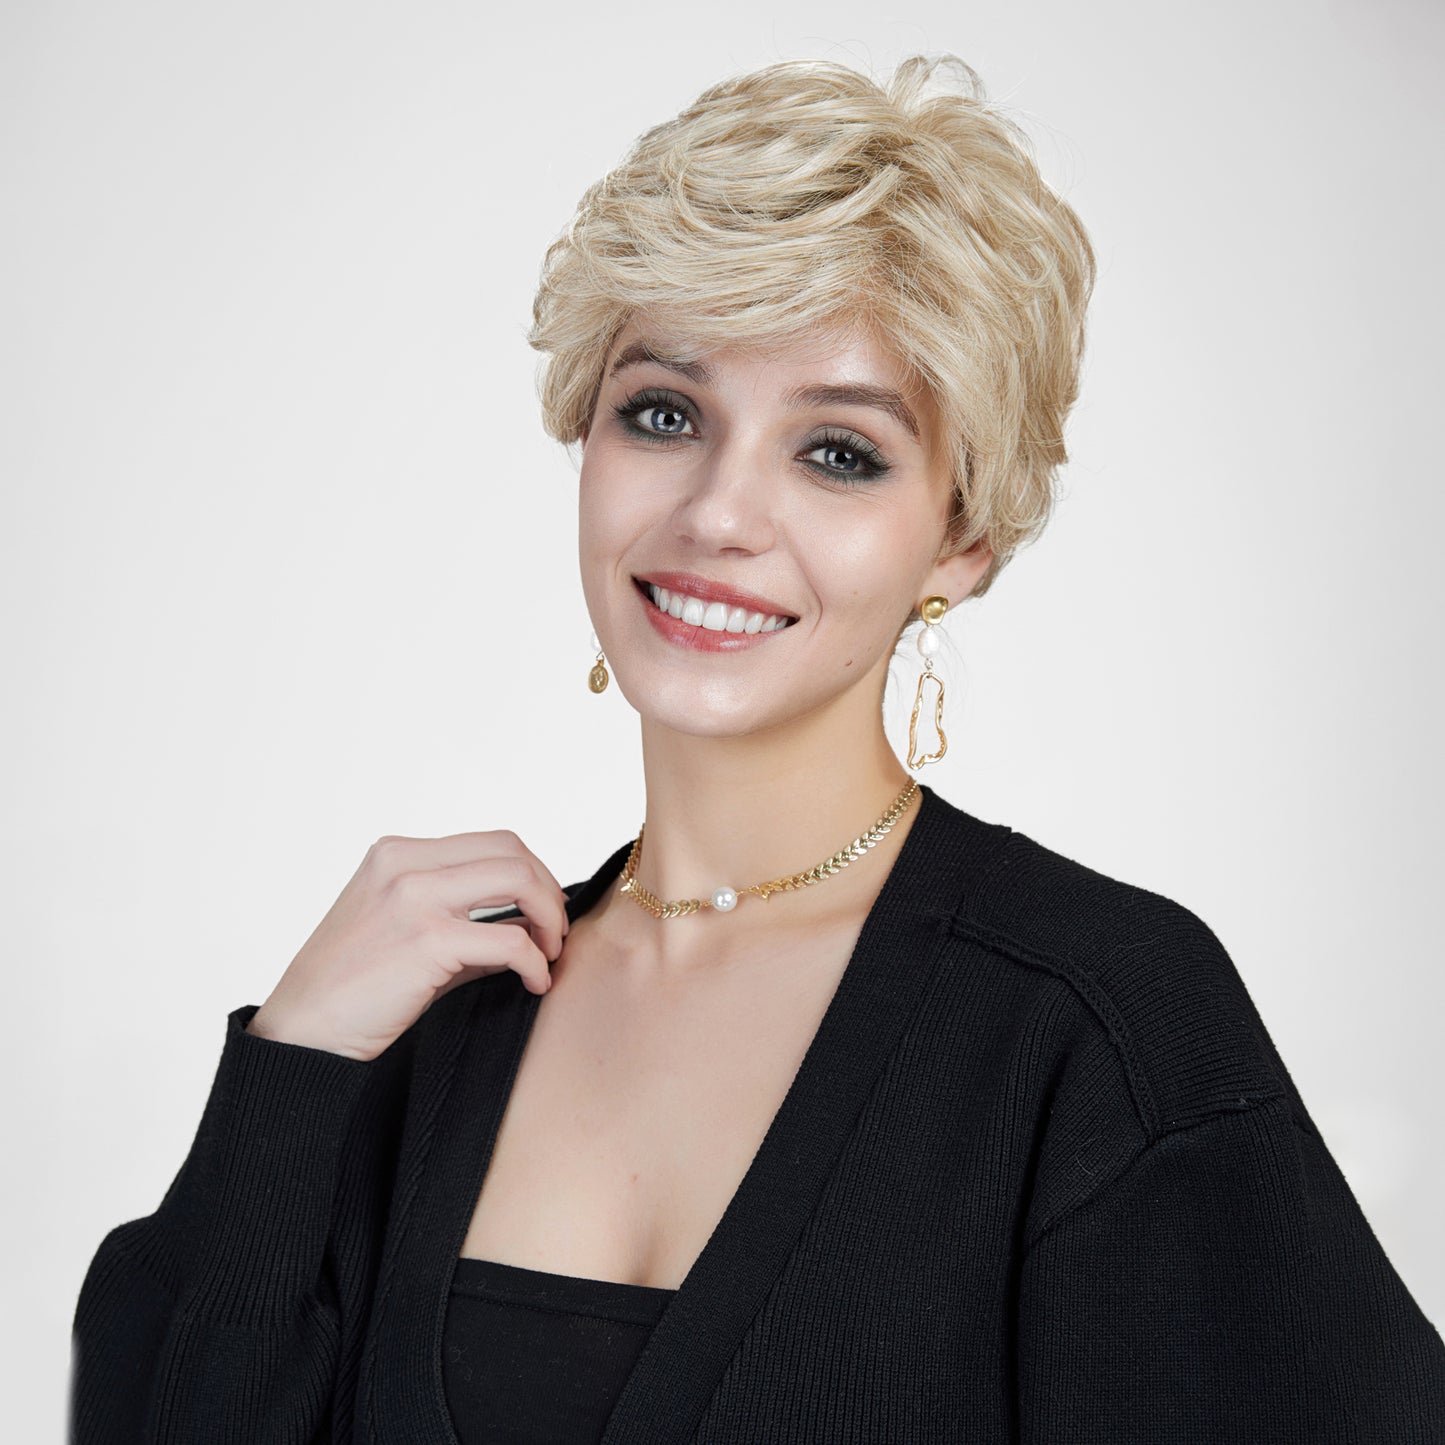 【MONO】【Galatea】Loxology | Synthetic Lace Front Short Blonde Wigs Breathable Wigs